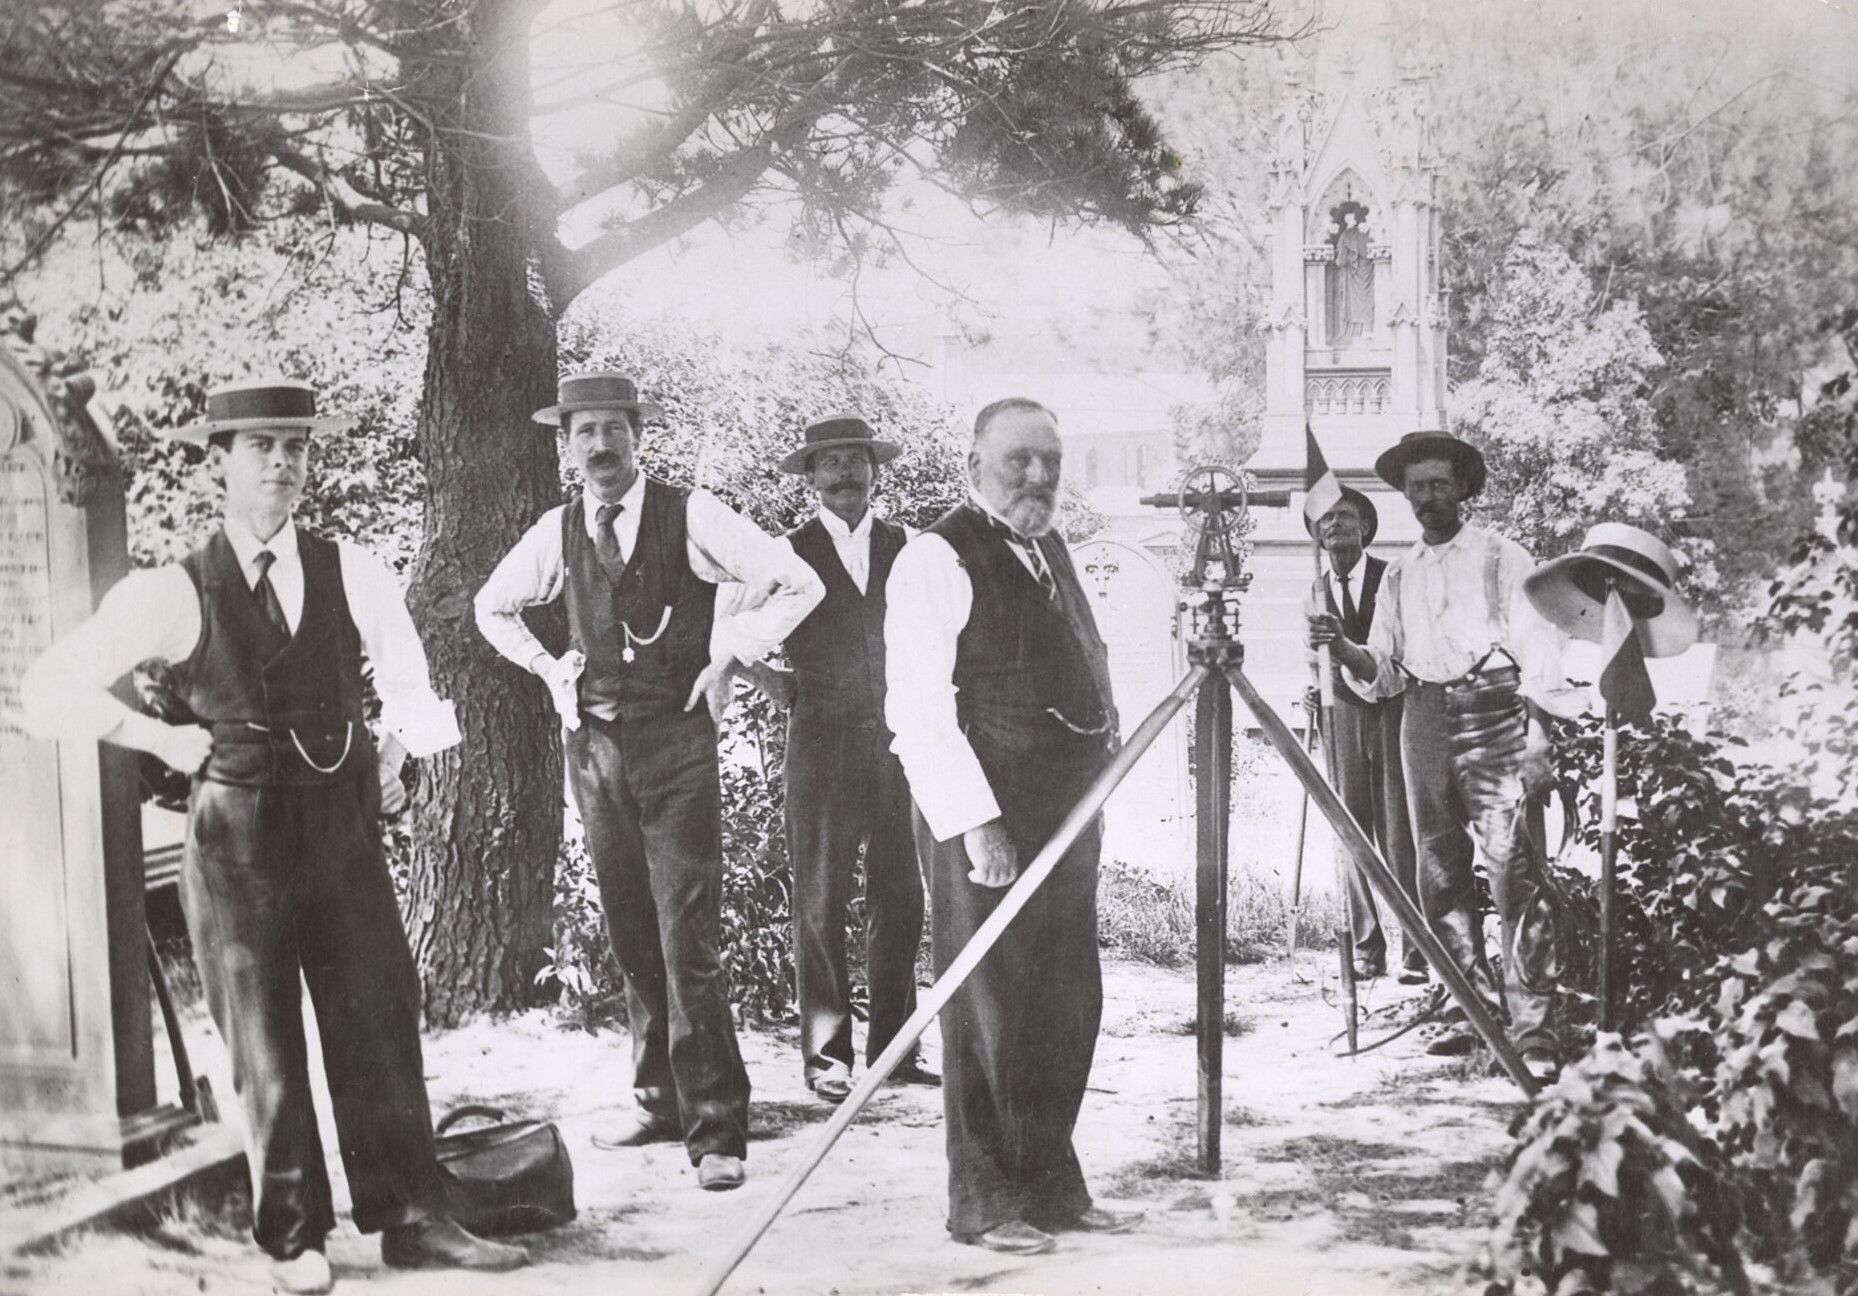 A group of men stand with their surveying equipment